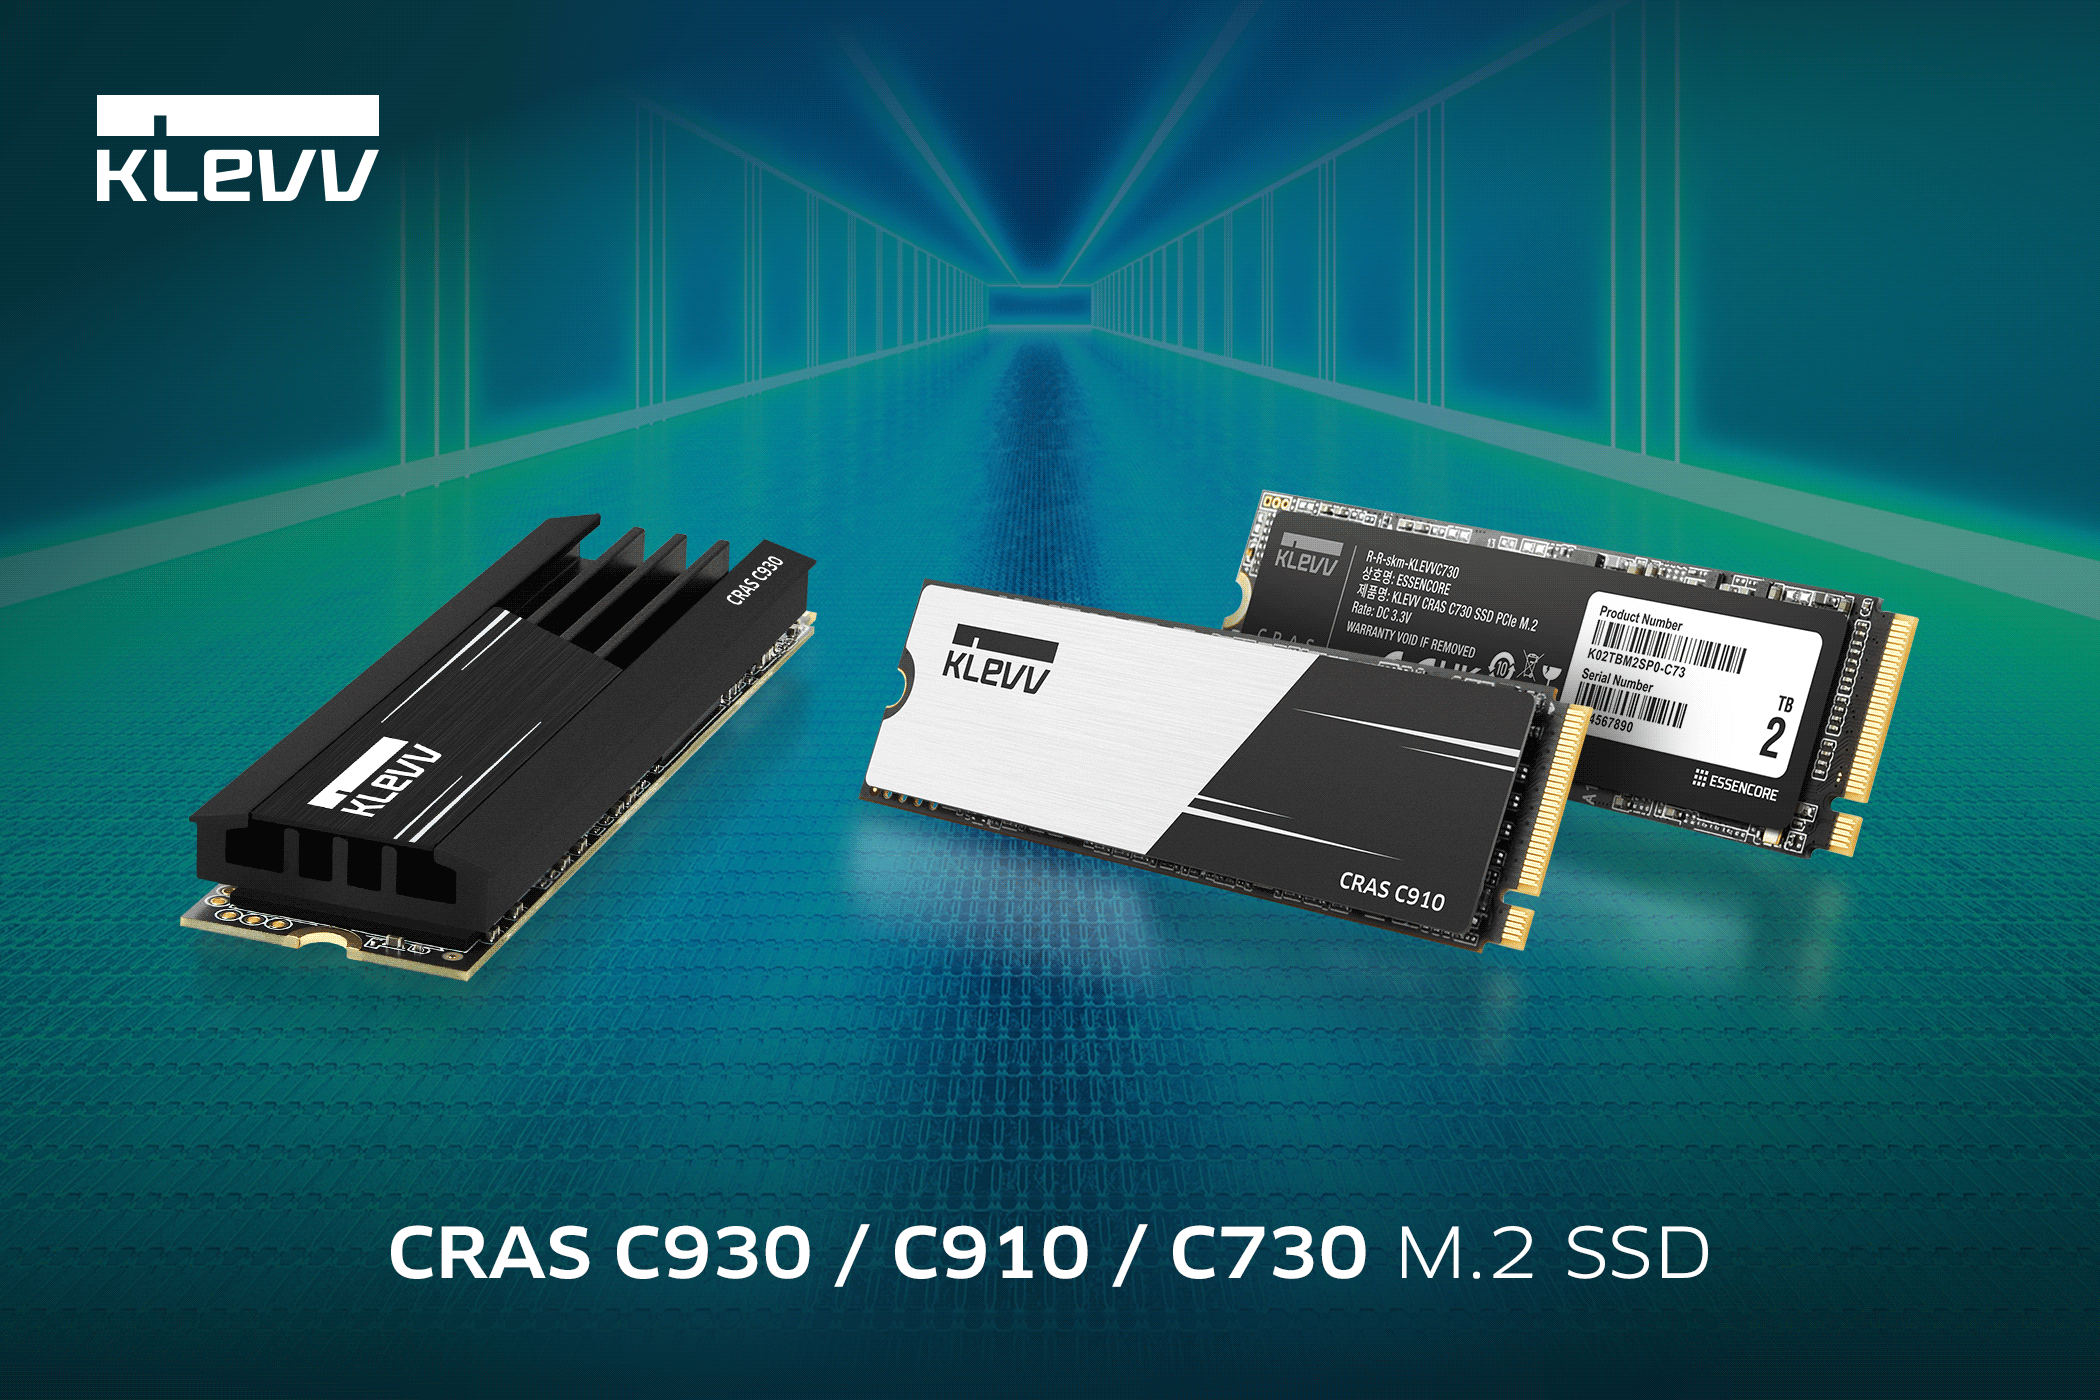 KLEVV INTRODUCES THREE NEW M.2 NVMe SSDS TO THE MARKET